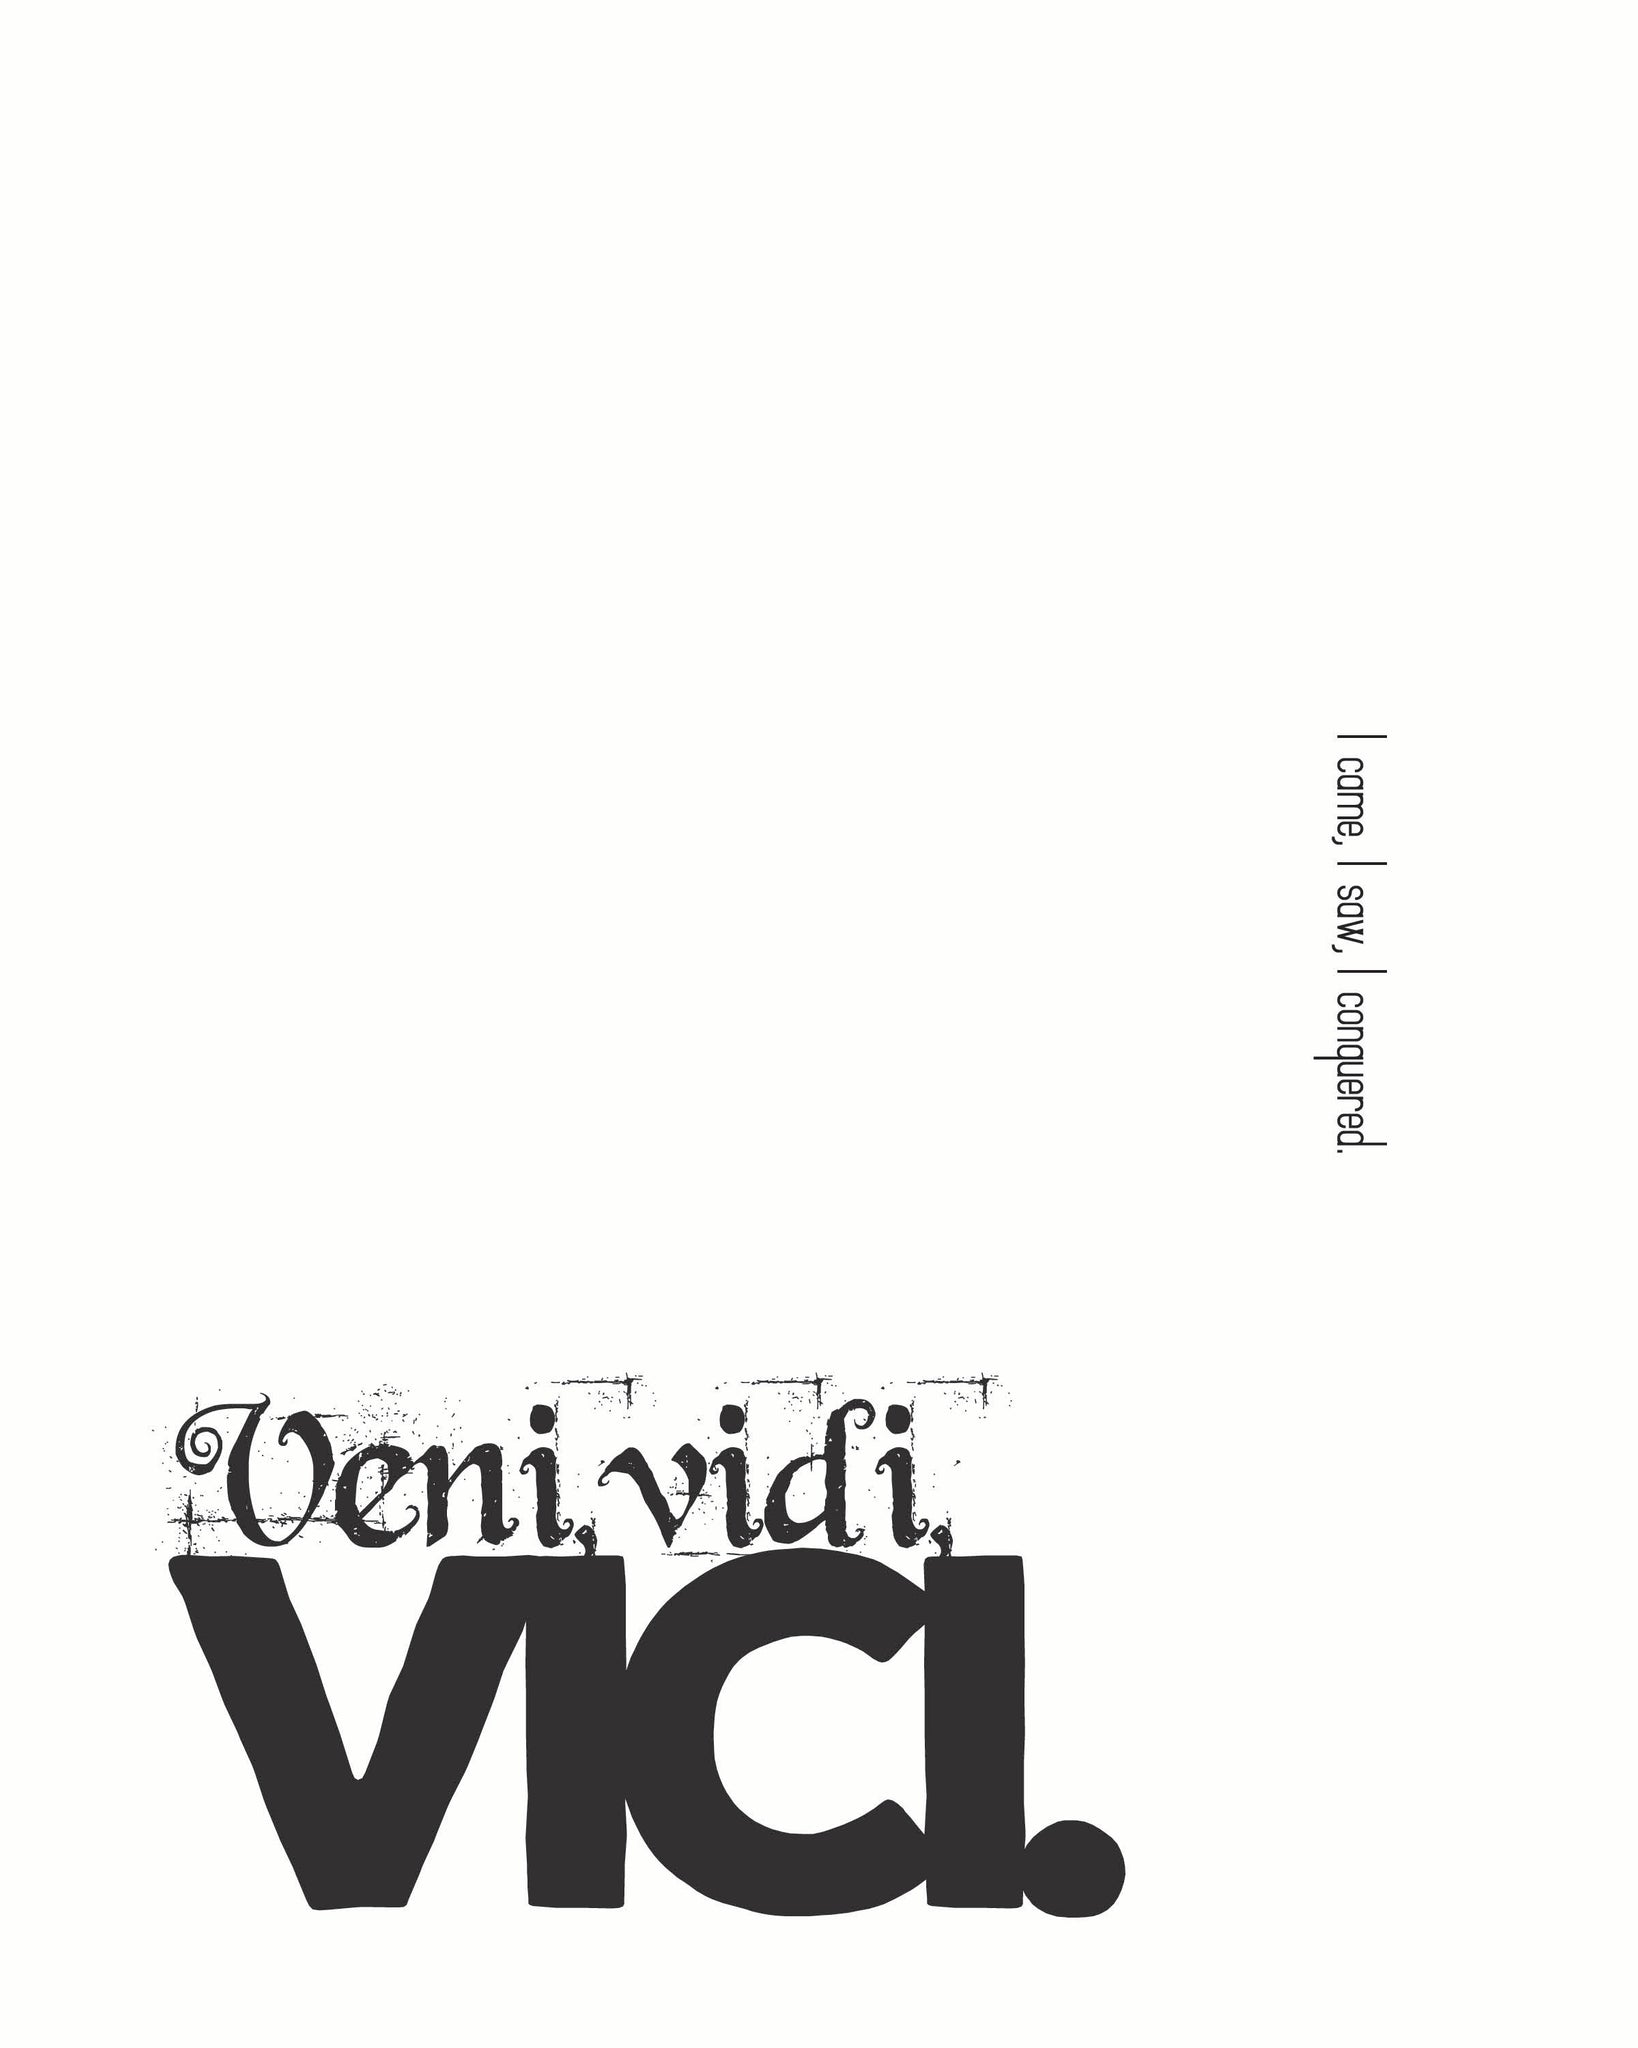 Download Veni, Vidi, Vici : Conquer Your Enemies, Impress Your Friends with  Everyday Latin PDF